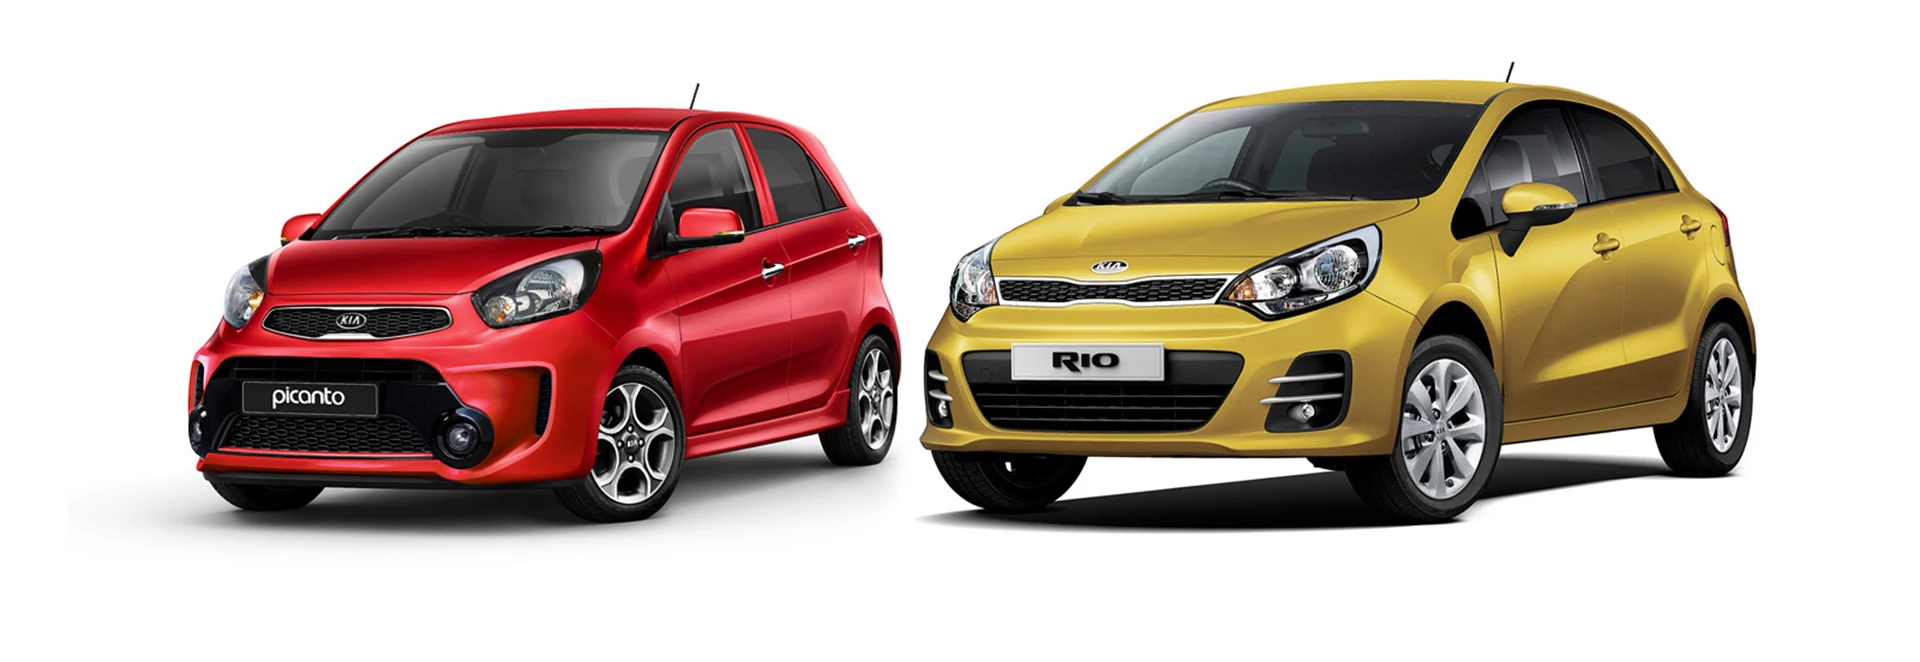 Kia Picanto and Rio line-ups now simpler and better equipped 